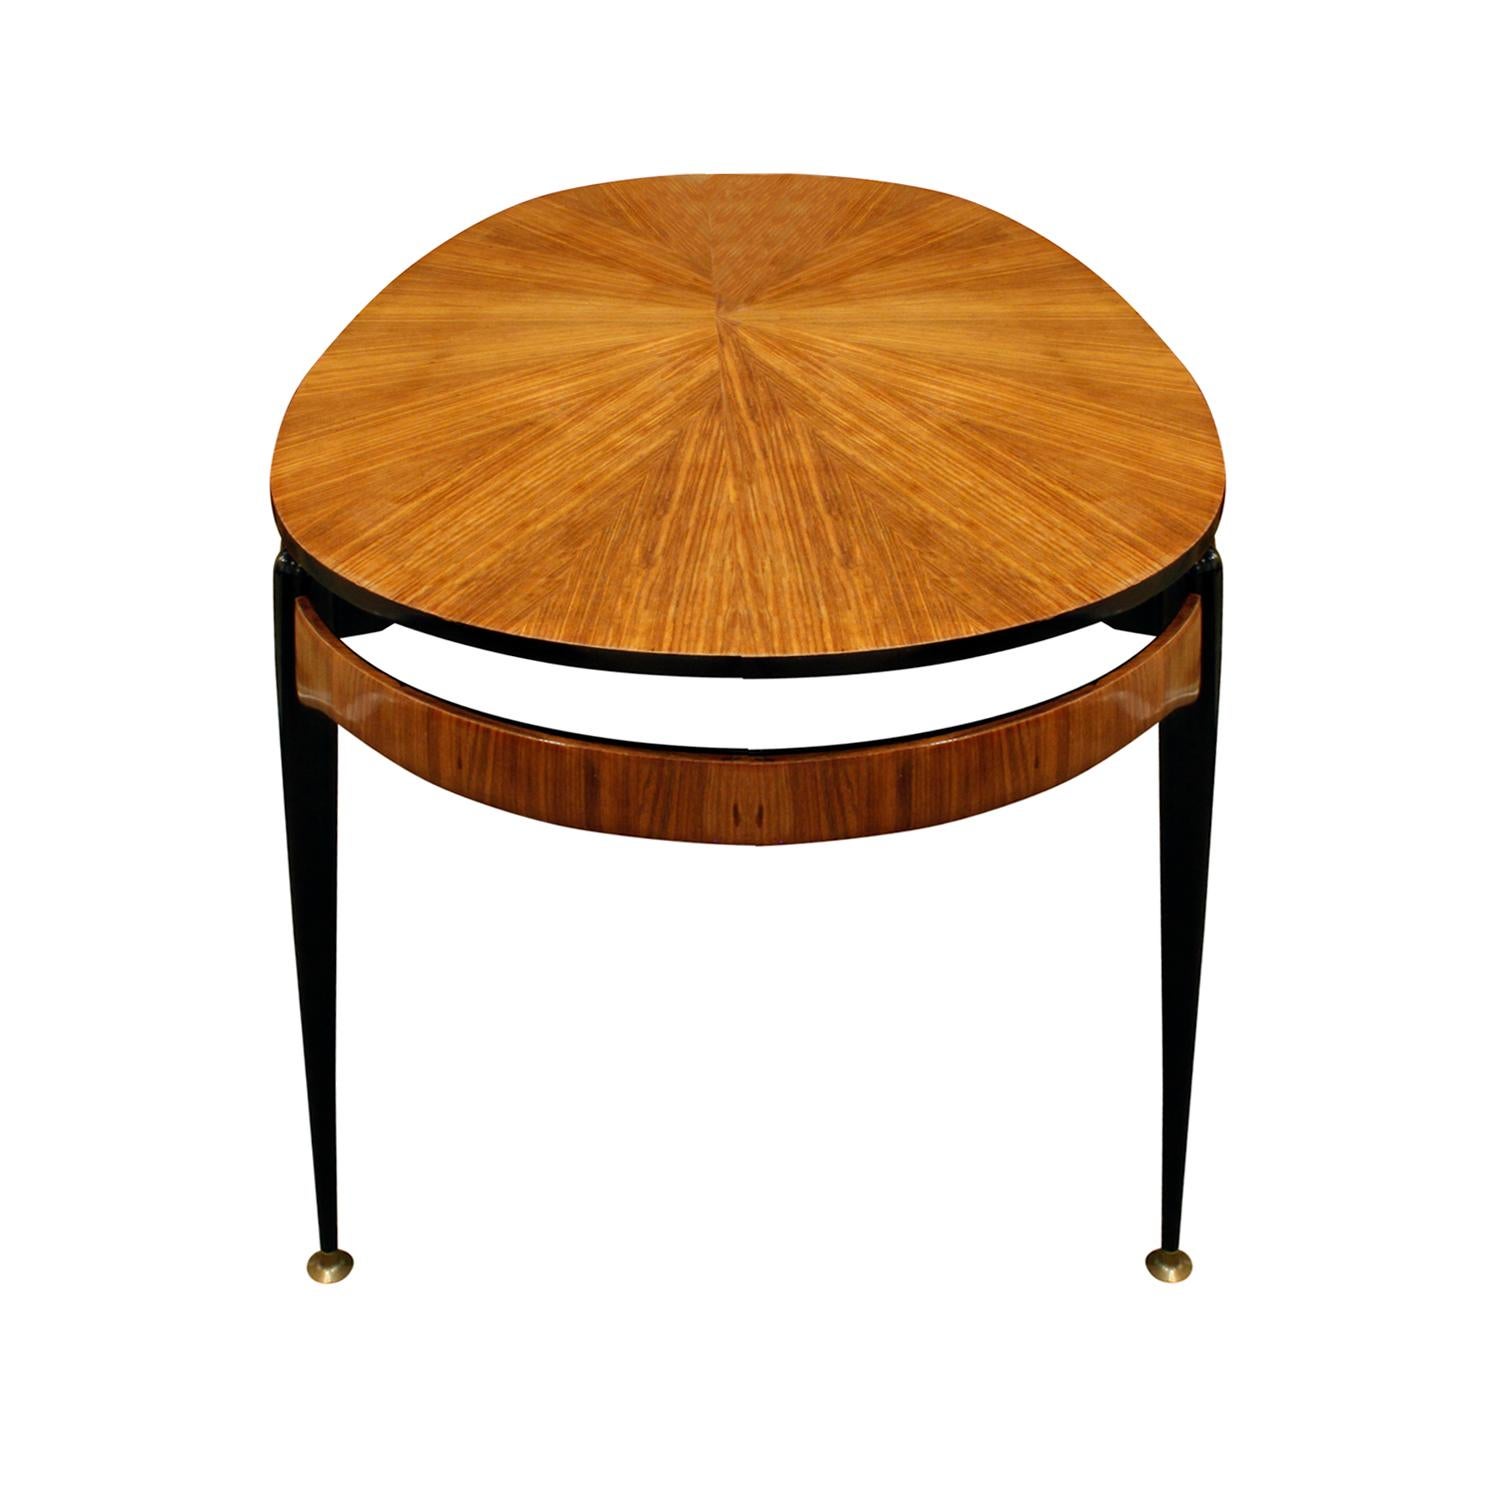 Mid-Century Modern Beautiful Radiating Rosewood Dining Table, attributed to Ico Parisi, circa 1954 For Sale